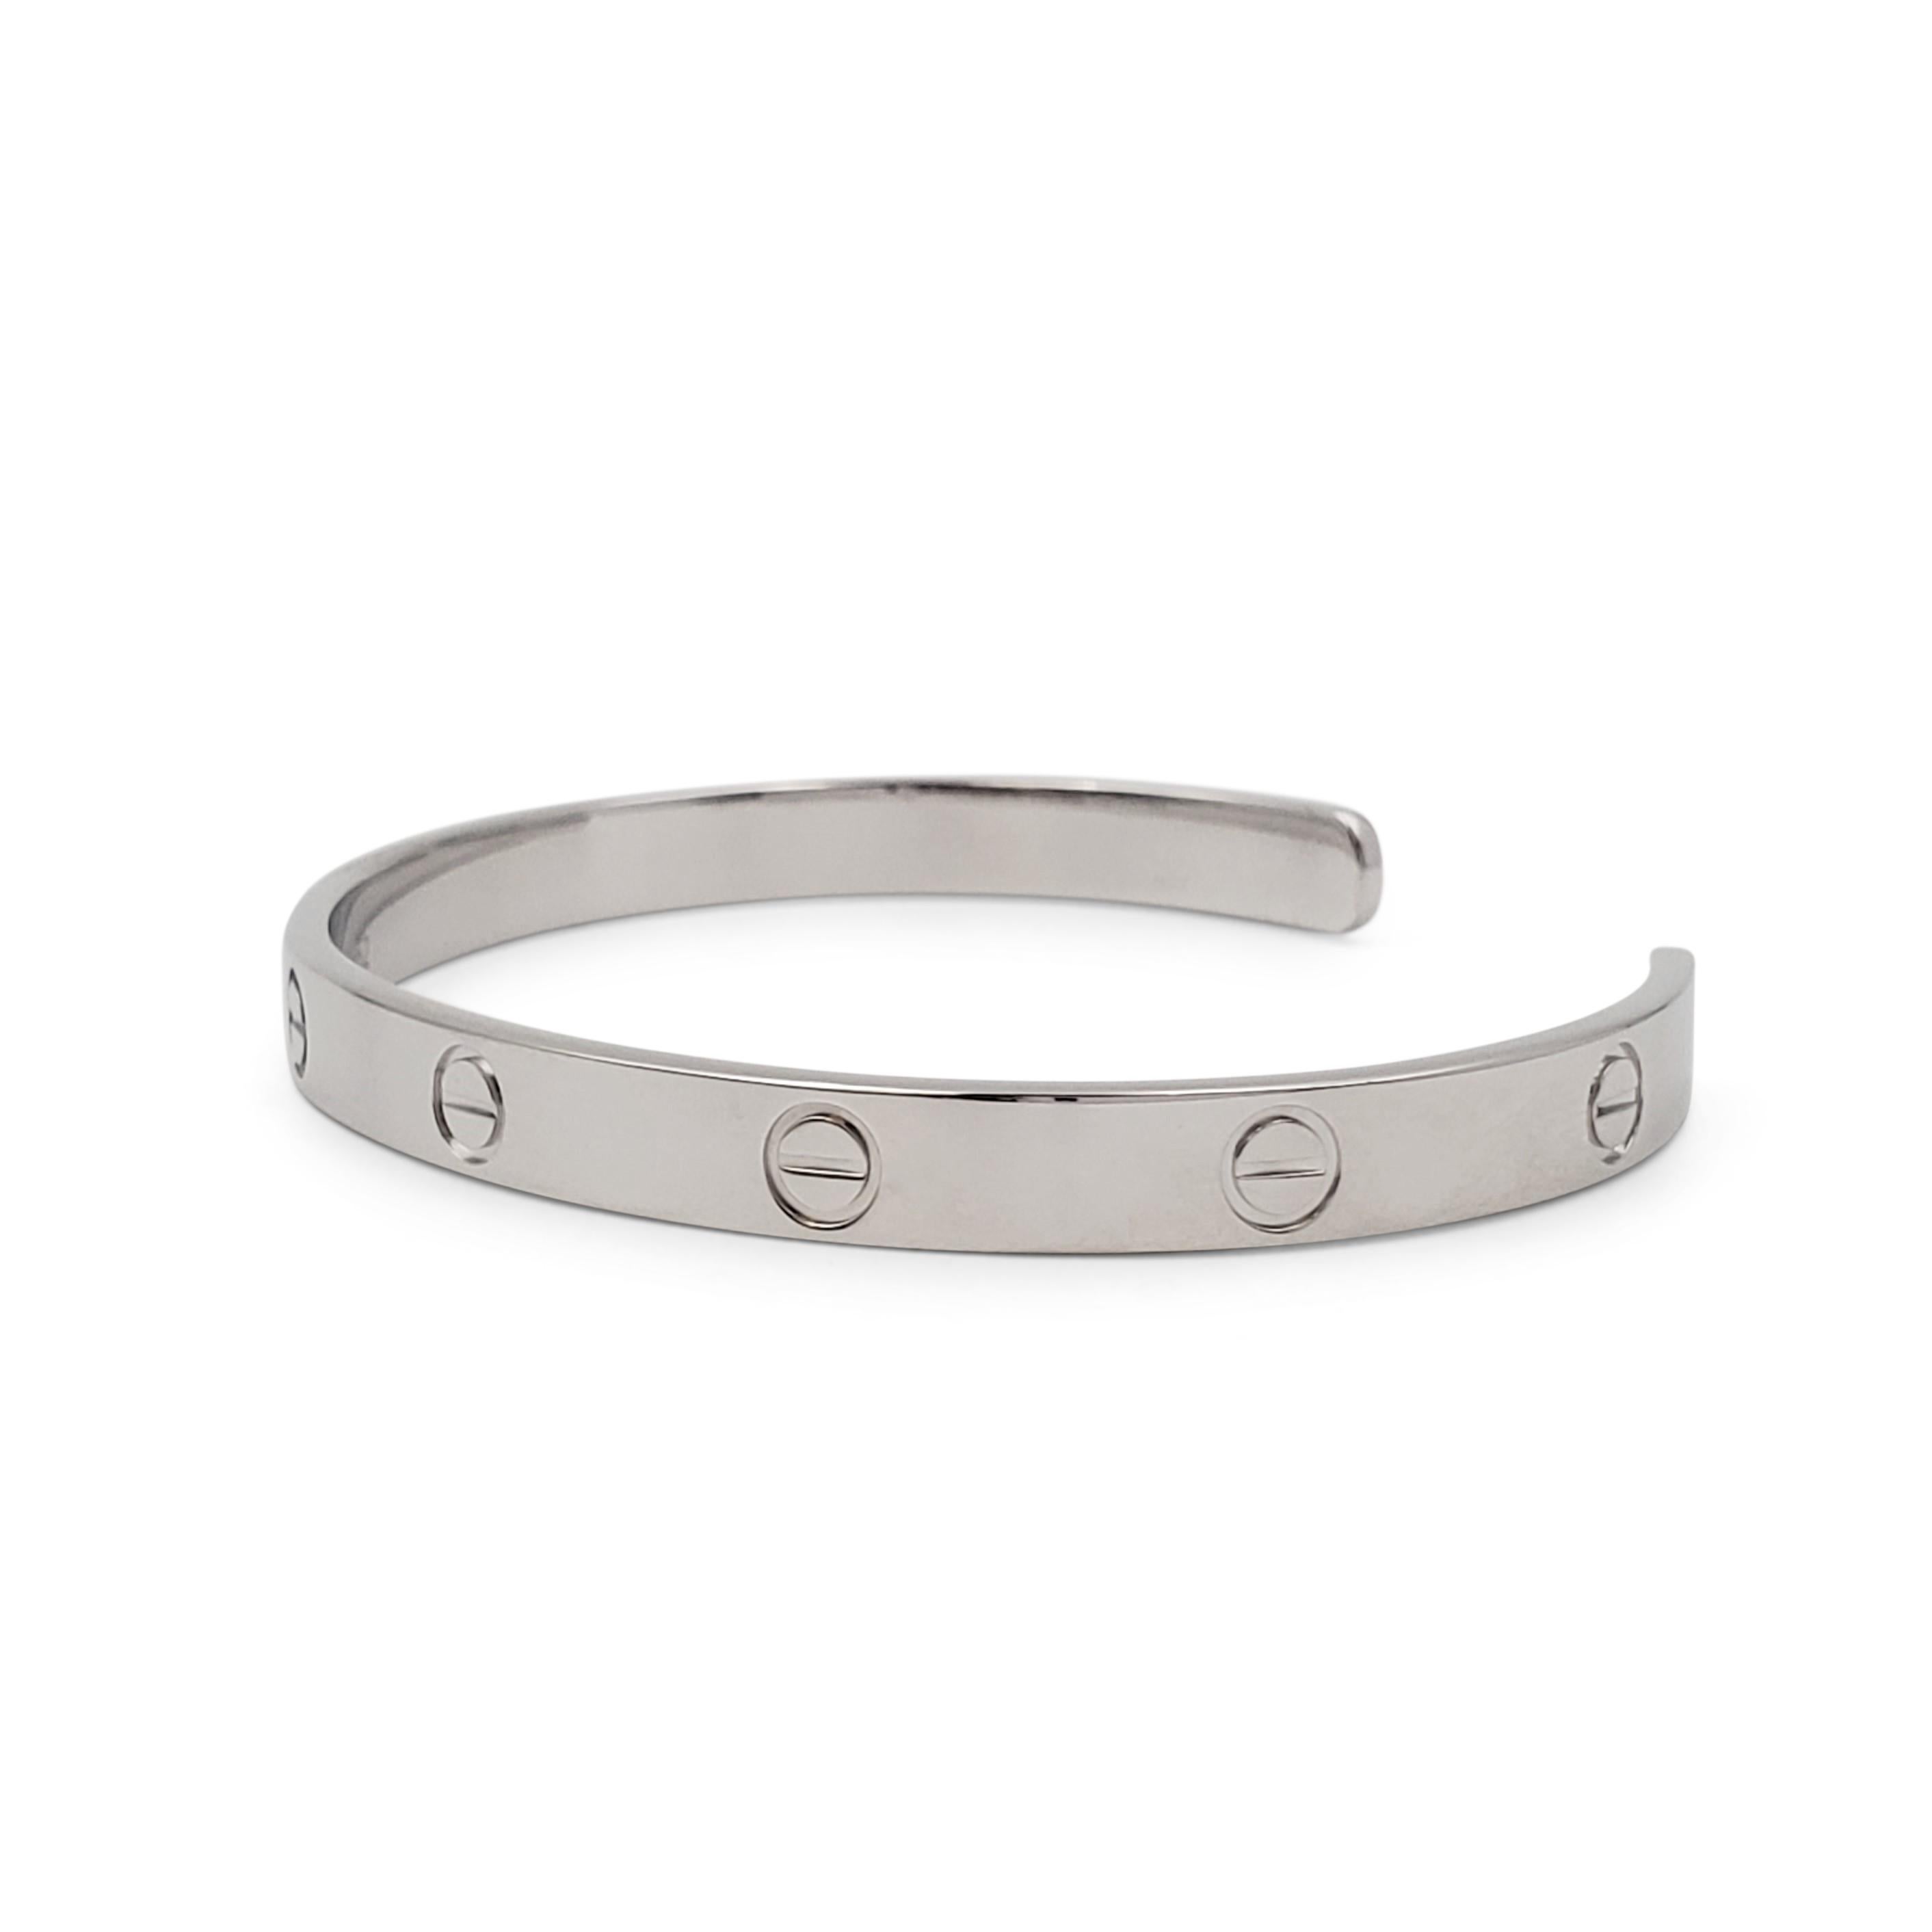 Authentic Cartier 'Love' open cuff bracelet crafted in 18 karat white gold. Signed Cartier, 750, 20, with serial number and hallmarks. The bracelet is not presented with the original box or papers. CIRCA 2010s.

Bracelet Size: 20 (20 cm)
Box: